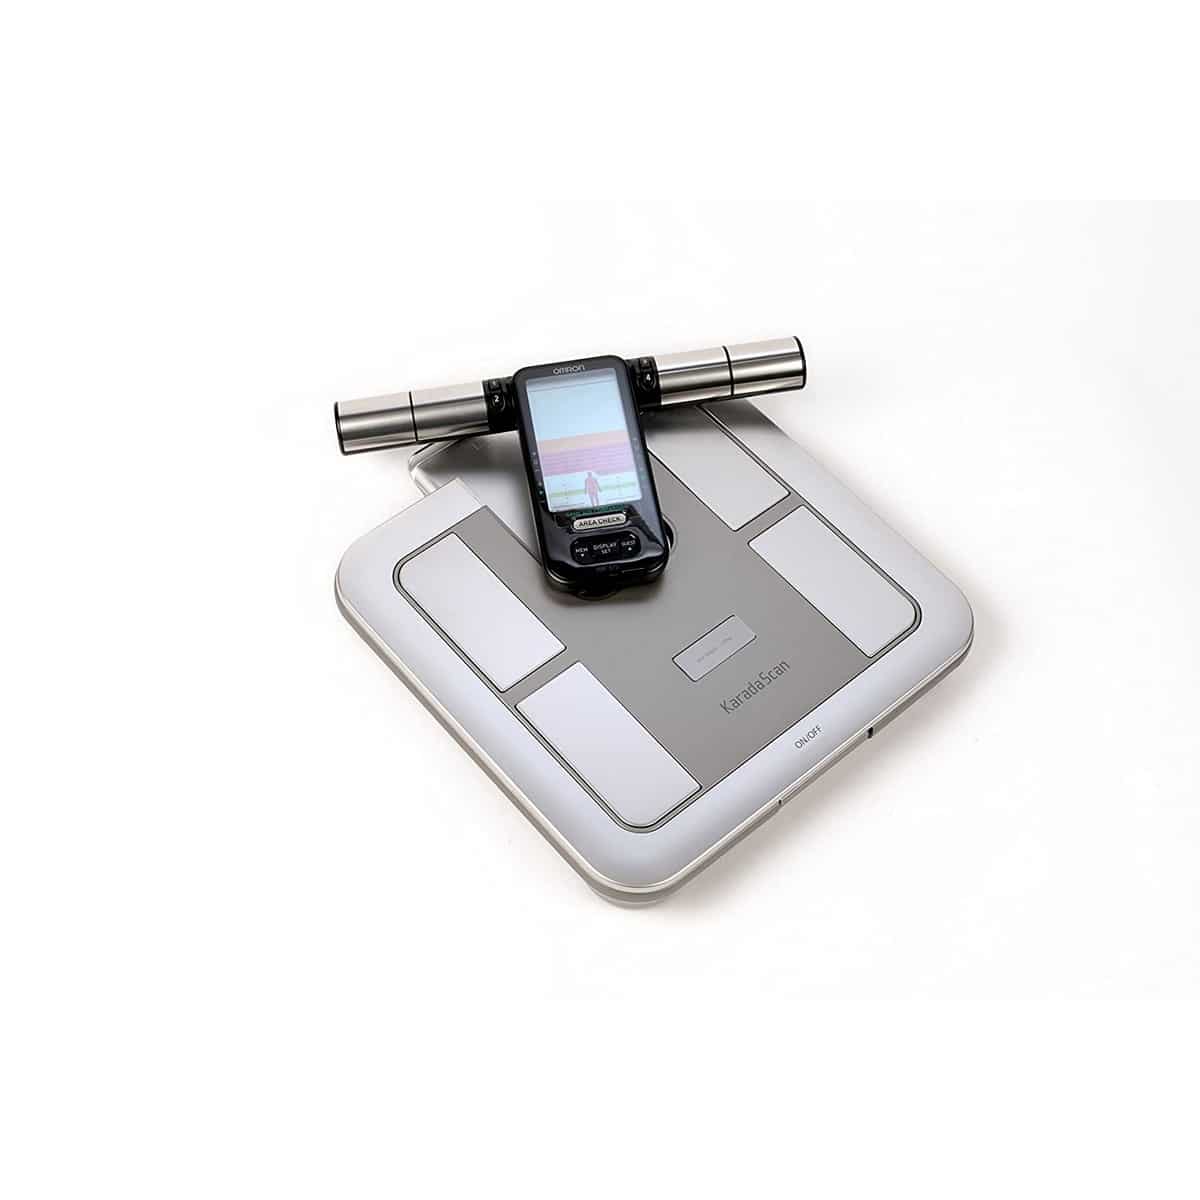 Omron Body Composition Monitor and Scale with Hand Grip-2826